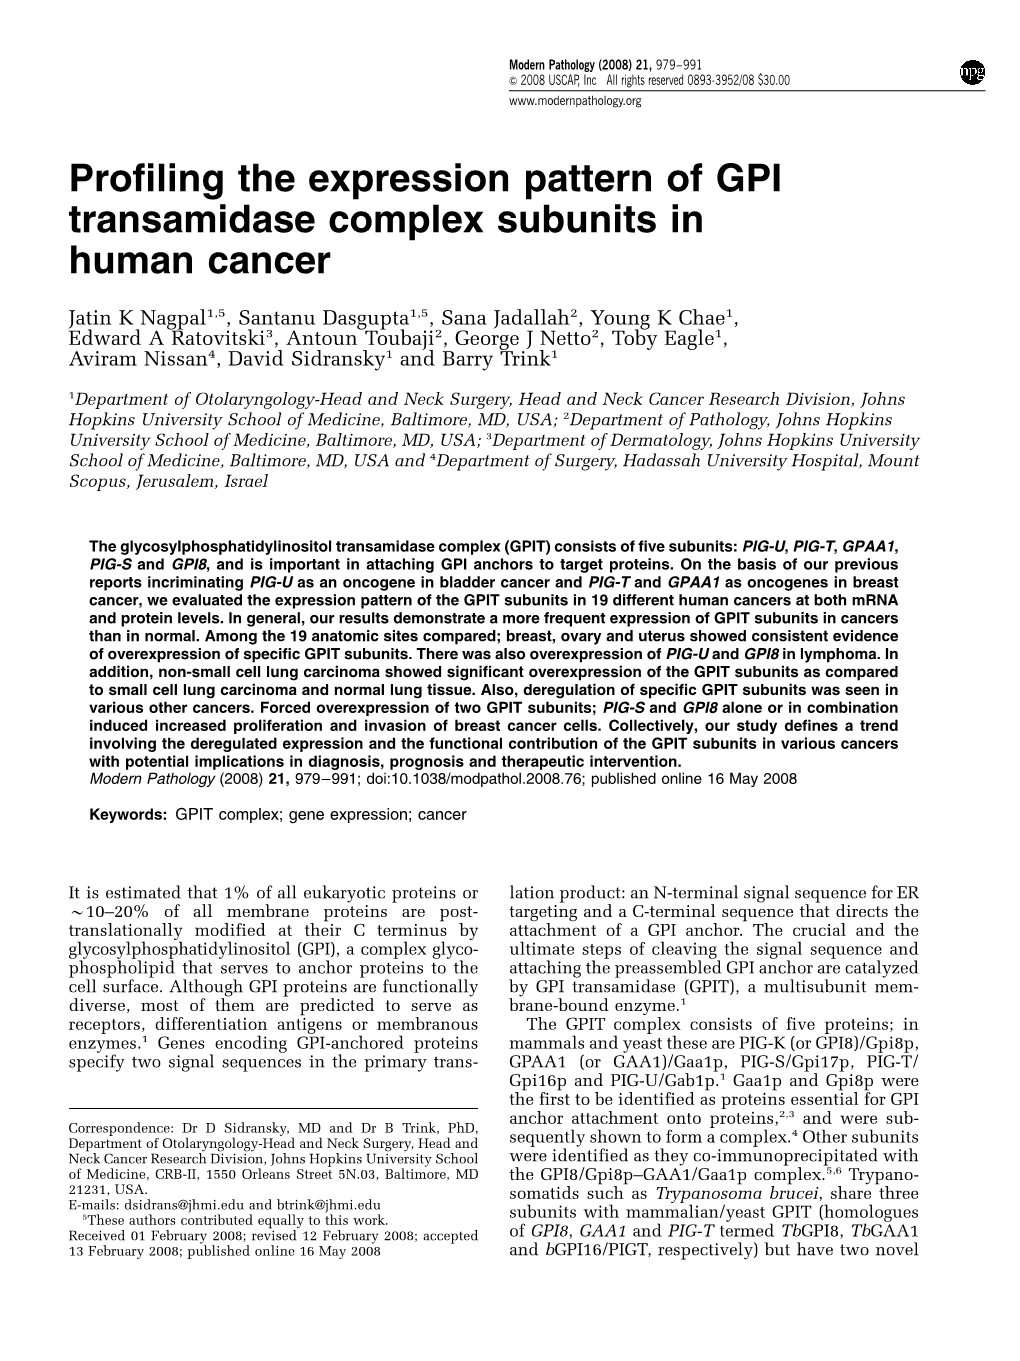 Profiling the Expression Pattern of GPI Transamidase Complex Subunits in Human Cancer